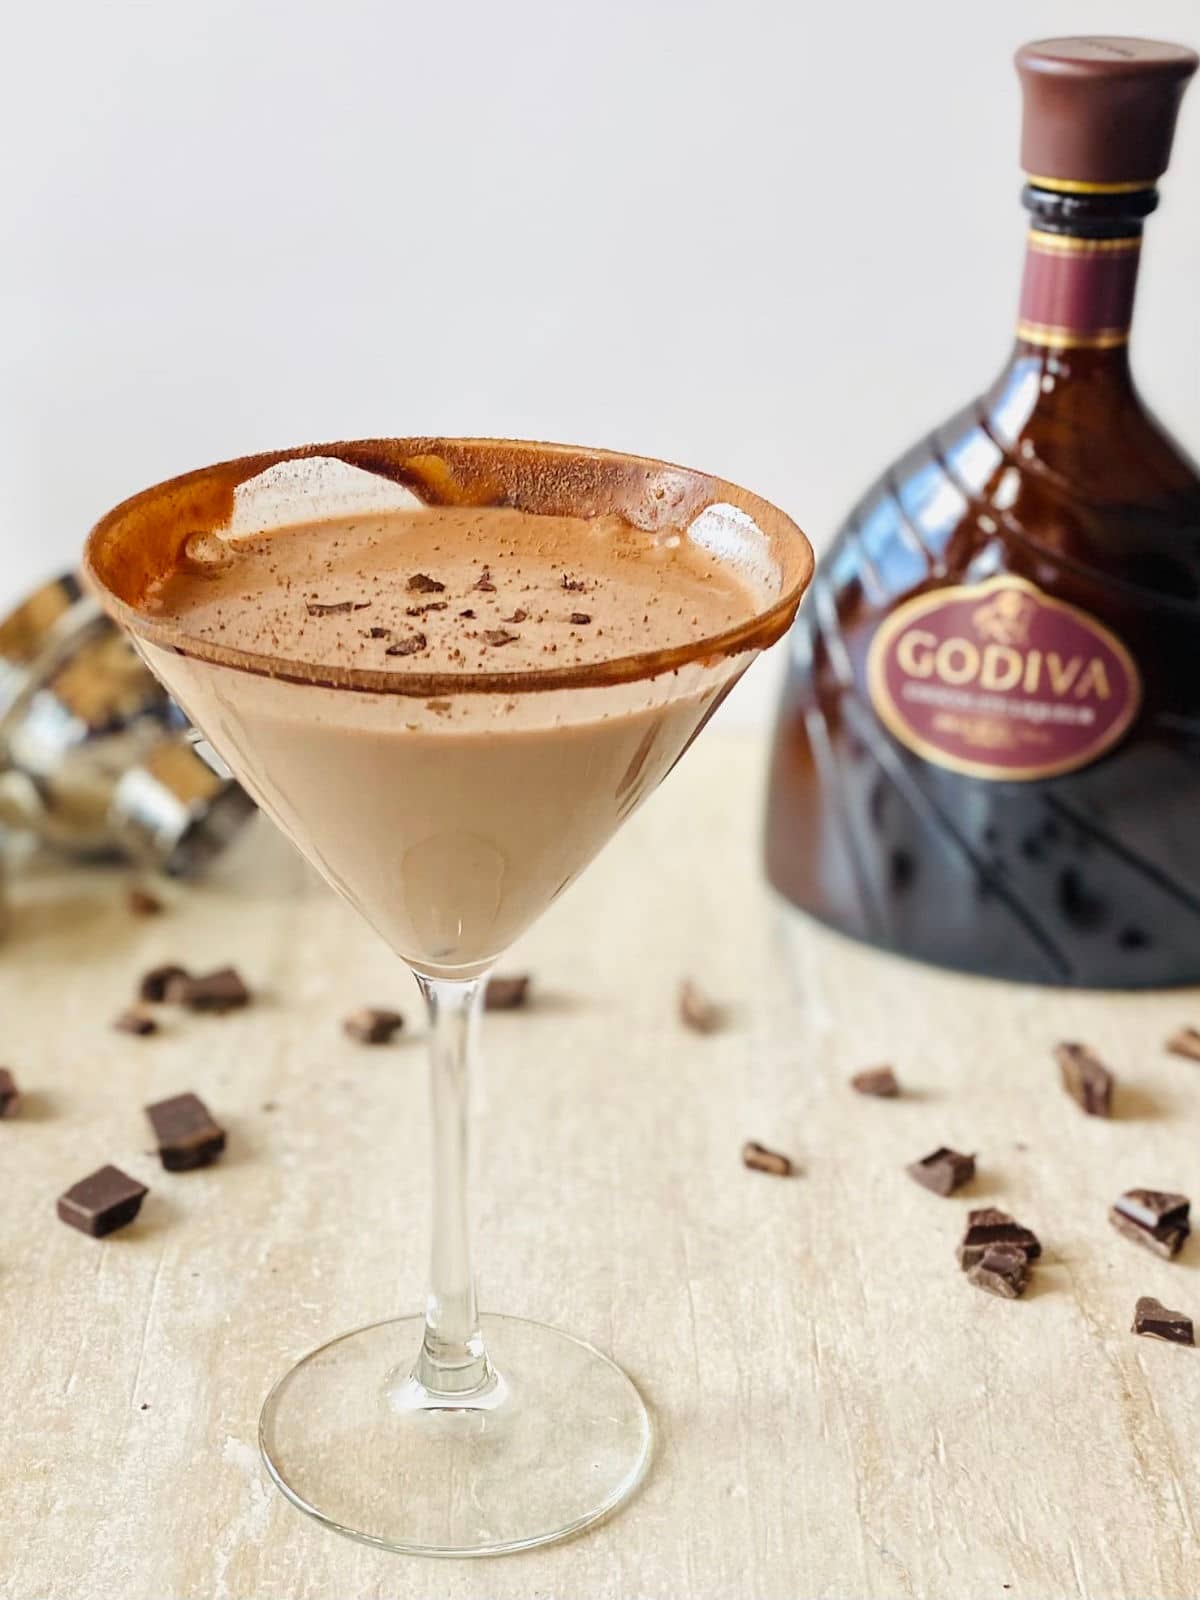 godiva chocolate liqueur martini in a martini glass with a bottle of Godiva chocolate liqueur, a cocktail shaker and chocolate in the background